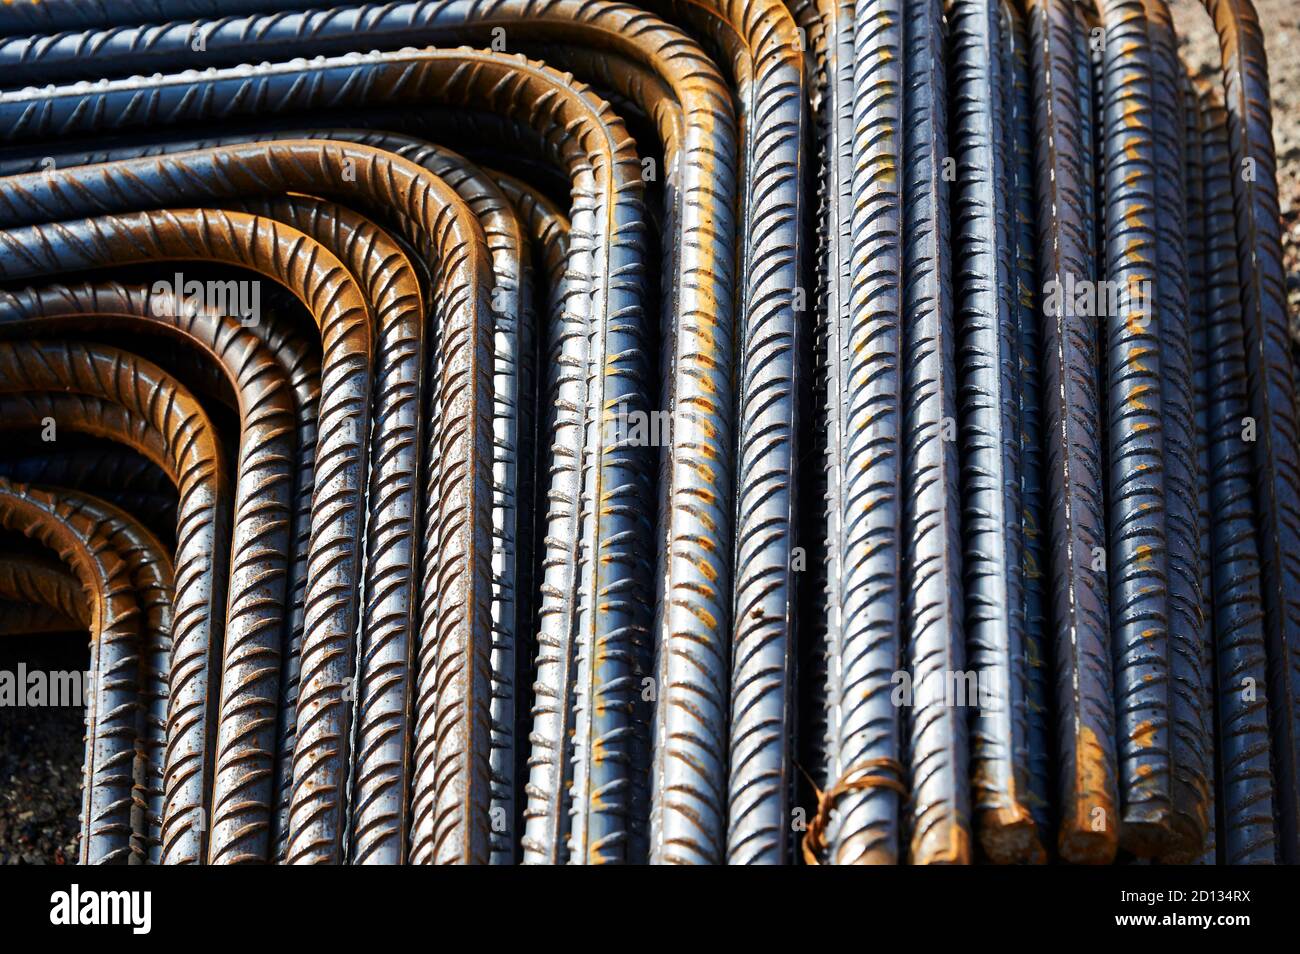 Uk construction industry at work - structural steel, abstract image Stock Photo